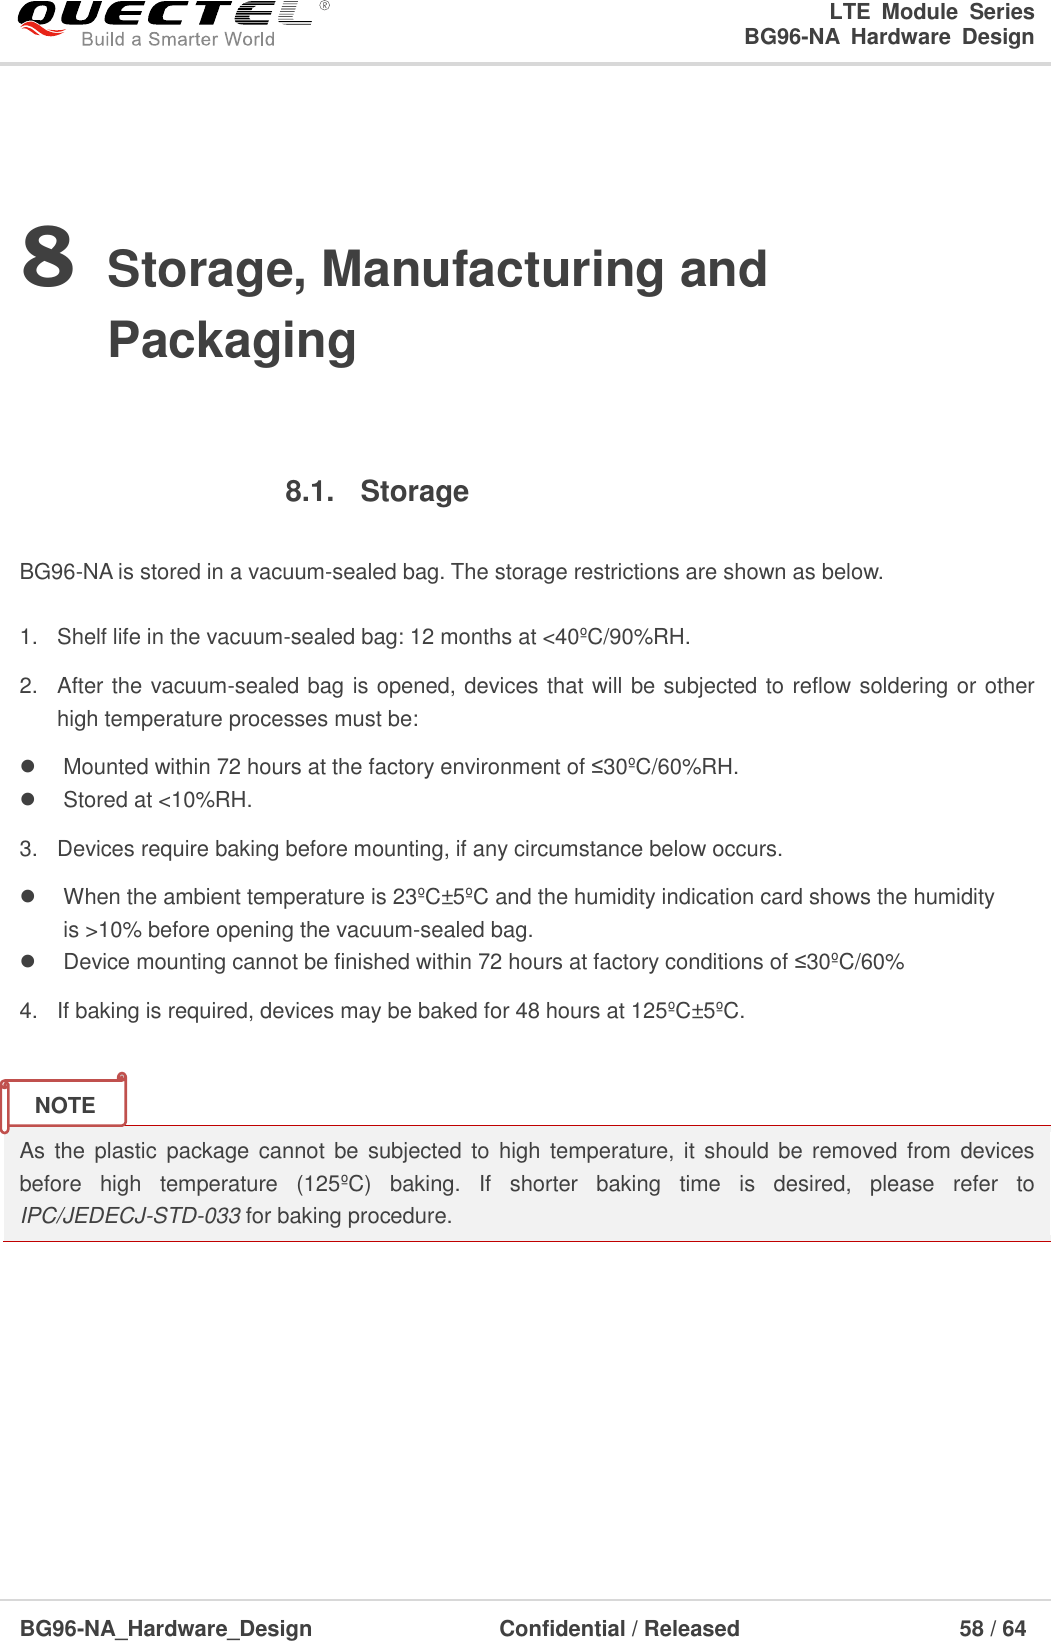 LTE  Module  Series                                                  BG96-NA  Hardware  Design  BG96-NA_Hardware_Design                              Confidential / Released                                  58 / 64    8 Storage, Manufacturing and Packaging  8.1.  Storage  BG96-NA is stored in a vacuum-sealed bag. The storage restrictions are shown as below.    1.  Shelf life in the vacuum-sealed bag: 12 months at &lt;40ºC/90%RH. 2.  After the vacuum-sealed bag is opened, devices that will be subjected to reflow soldering or other high temperature processes must be:     Mounted within 72 hours at the factory environment of ≤30ºC/60%RH.   Stored at &lt;10%RH. 3.  Devices require baking before mounting, if any circumstance below occurs.   When the ambient temperature is 23ºC±5ºC and the humidity indication card shows the humidity is &gt;10% before opening the vacuum-sealed bag.    Device mounting cannot be finished within 72 hours at factory conditions of ≤30ºC/60% 4.  If baking is required, devices may be baked for 48 hours at 125ºC±5ºC.   As  the  plastic  package cannot be  subjected to high  temperature, it  should  be  removed from  devices before  high  temperature  (125ºC )  baking.  If  shorter  baking  time  is  desired,  please  refer  to IPC/JEDECJ-STD-033 for baking procedure.       NOTE 